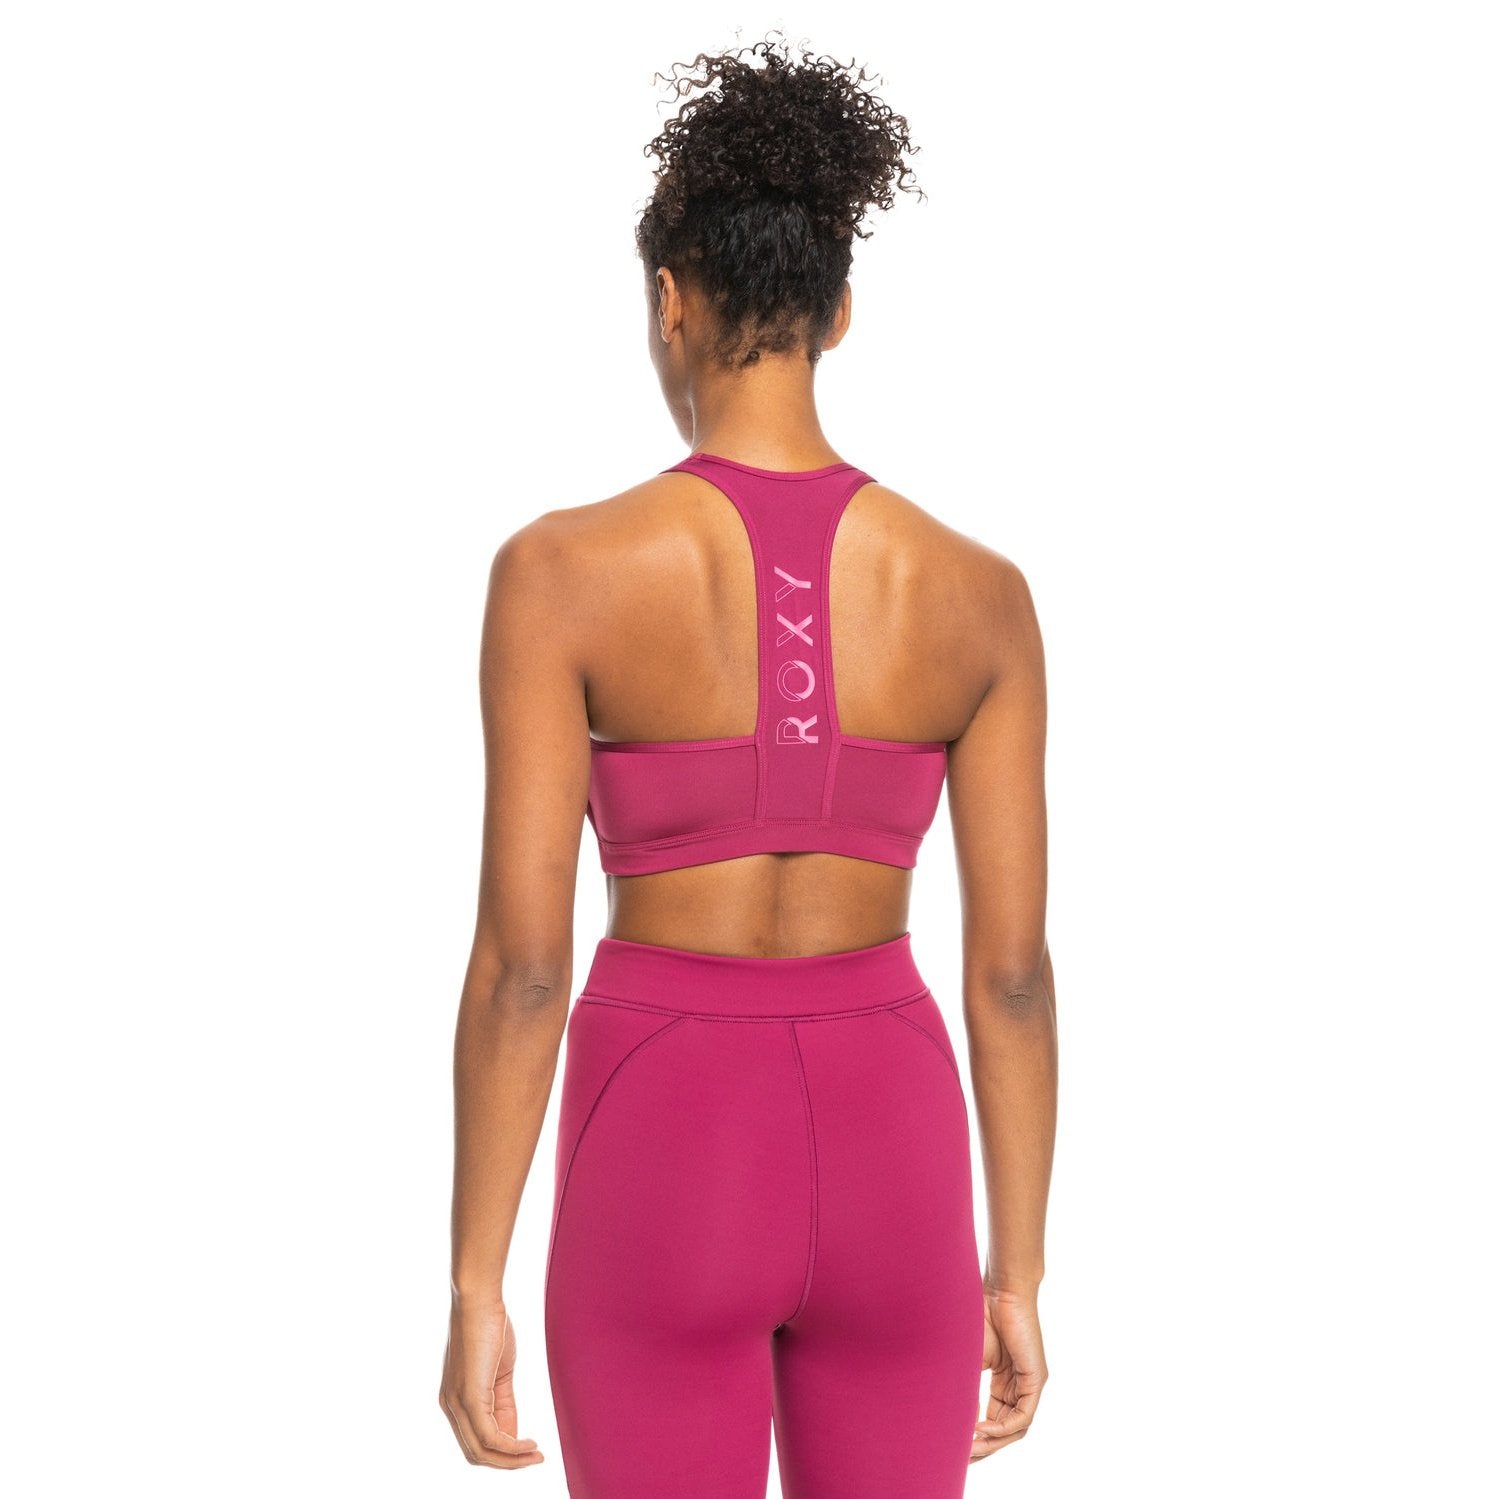 Back To You 2022 - Medium Support Sports Bra for Women